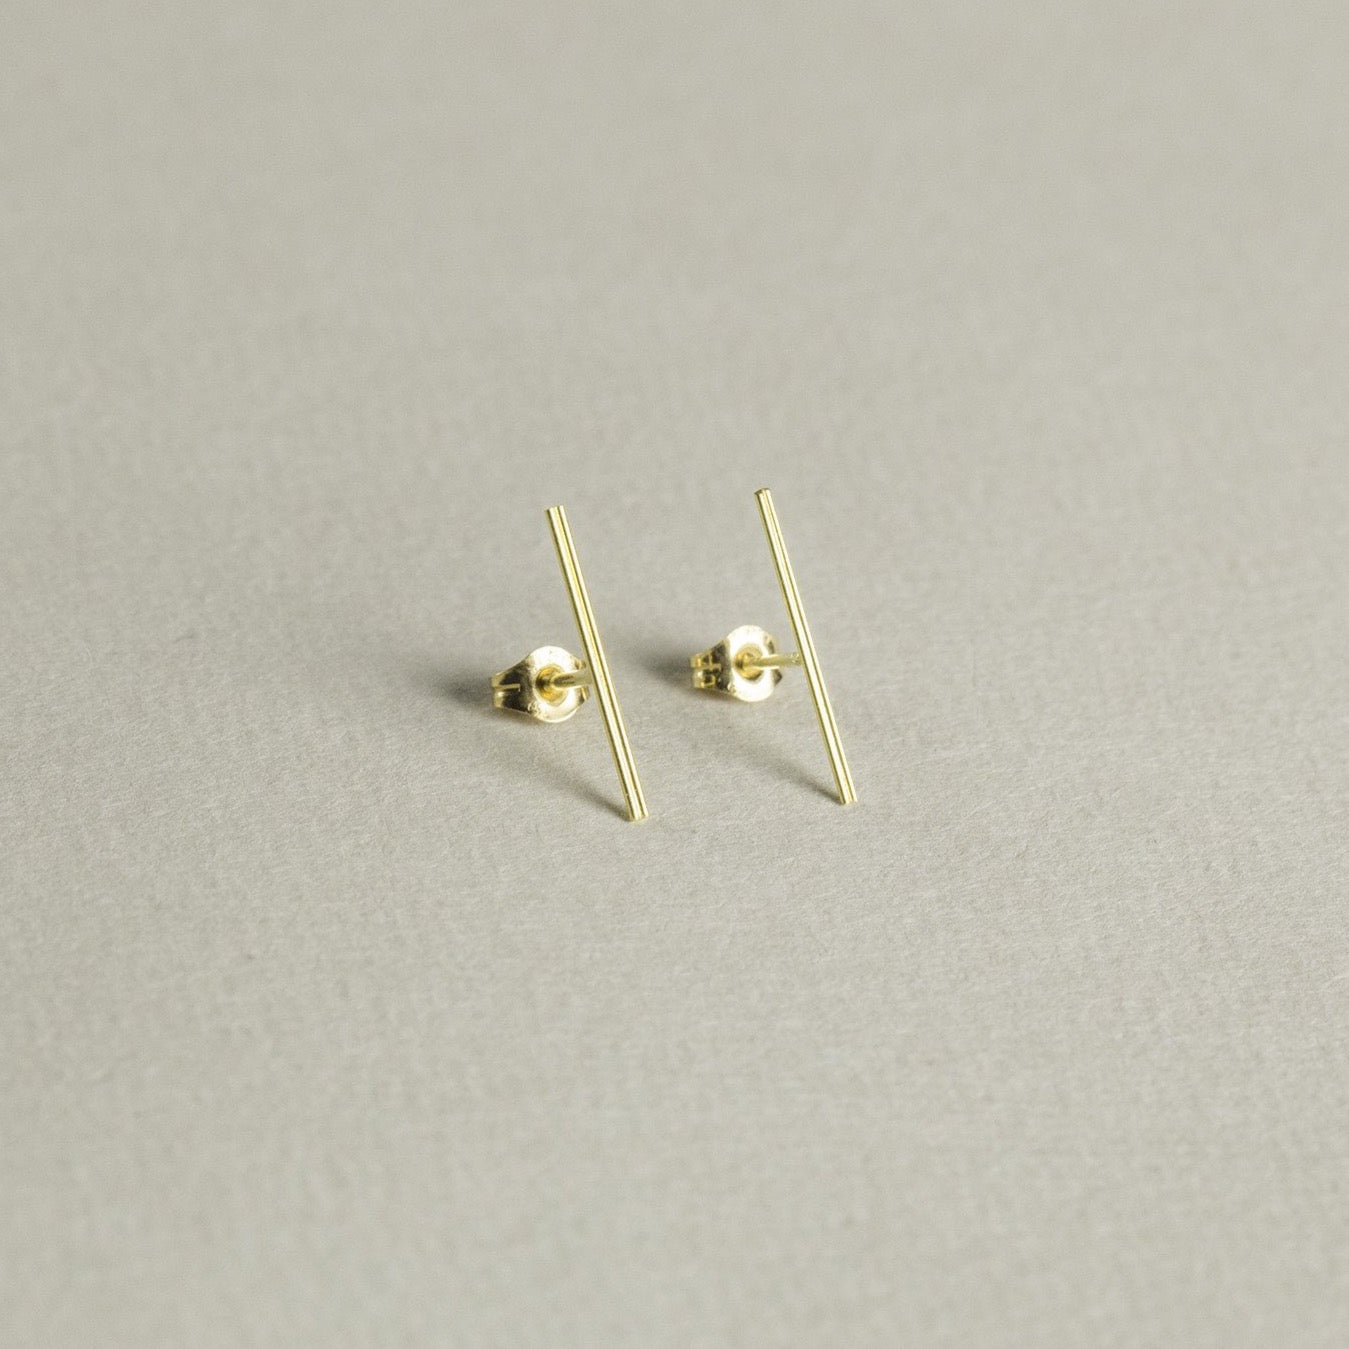 XILITLA Hook Earrings in either 9ct Yellow Gold or 18ct Yellow